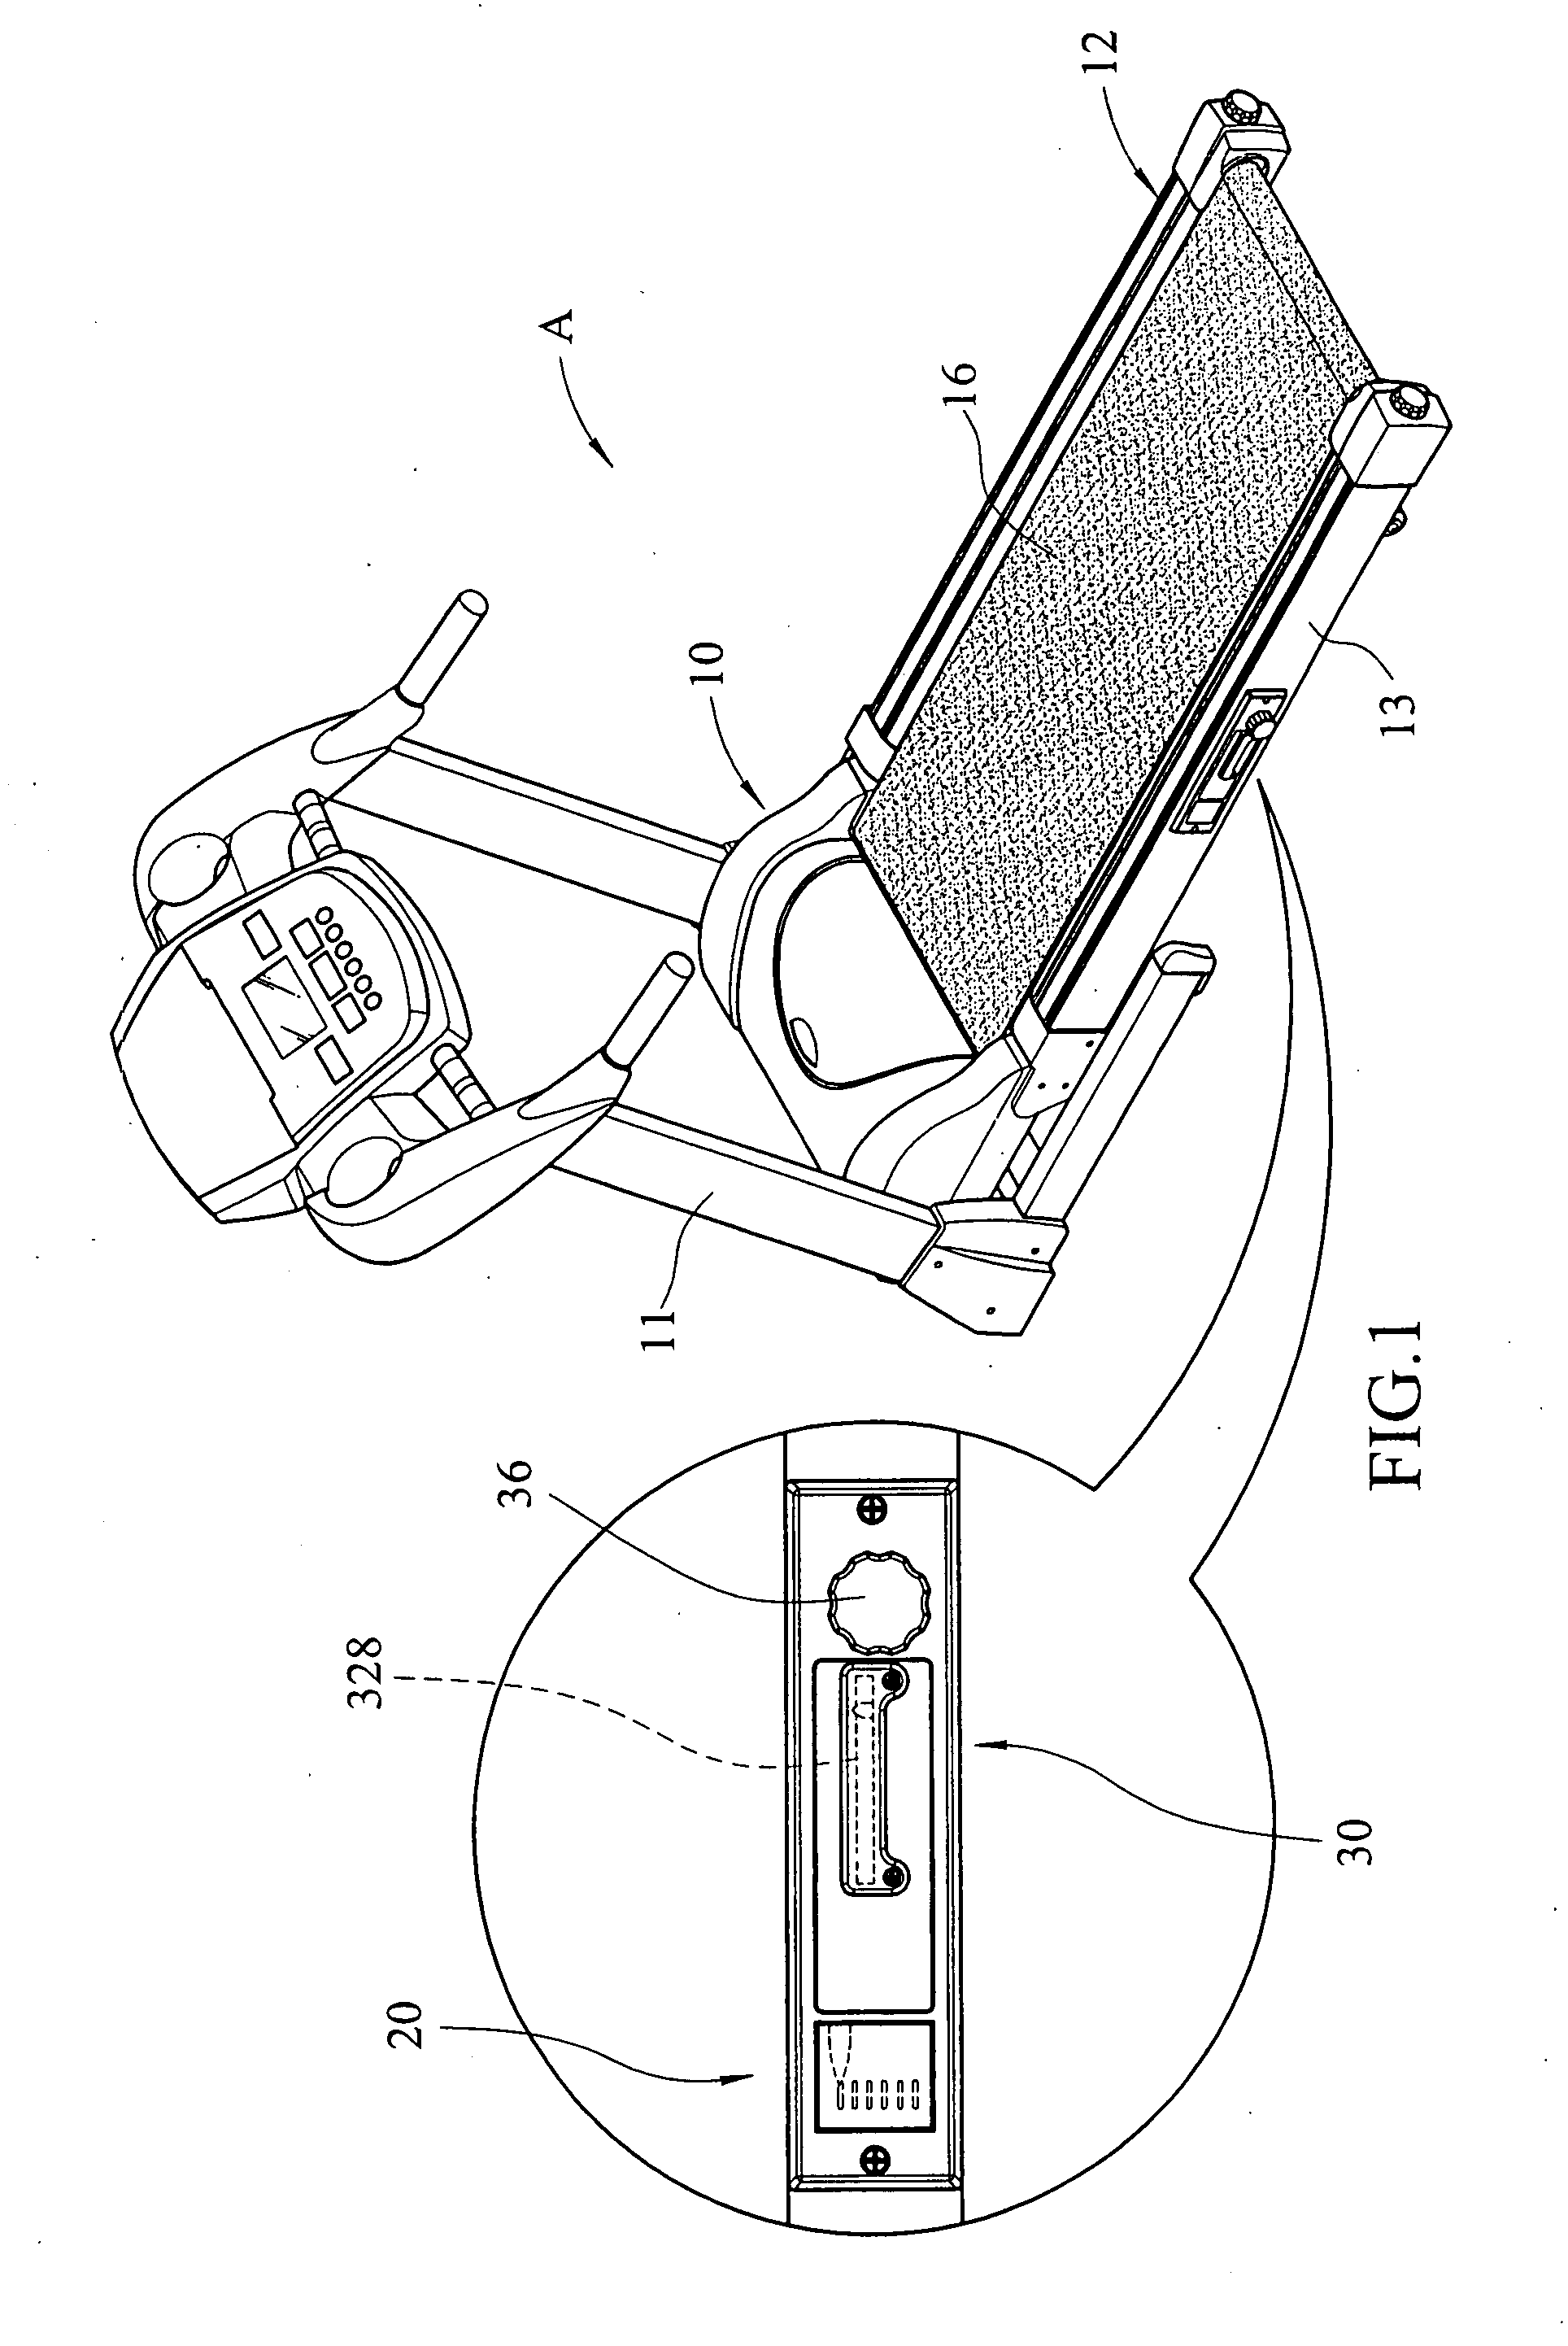 Cushion adjustable and display devices for treadmills